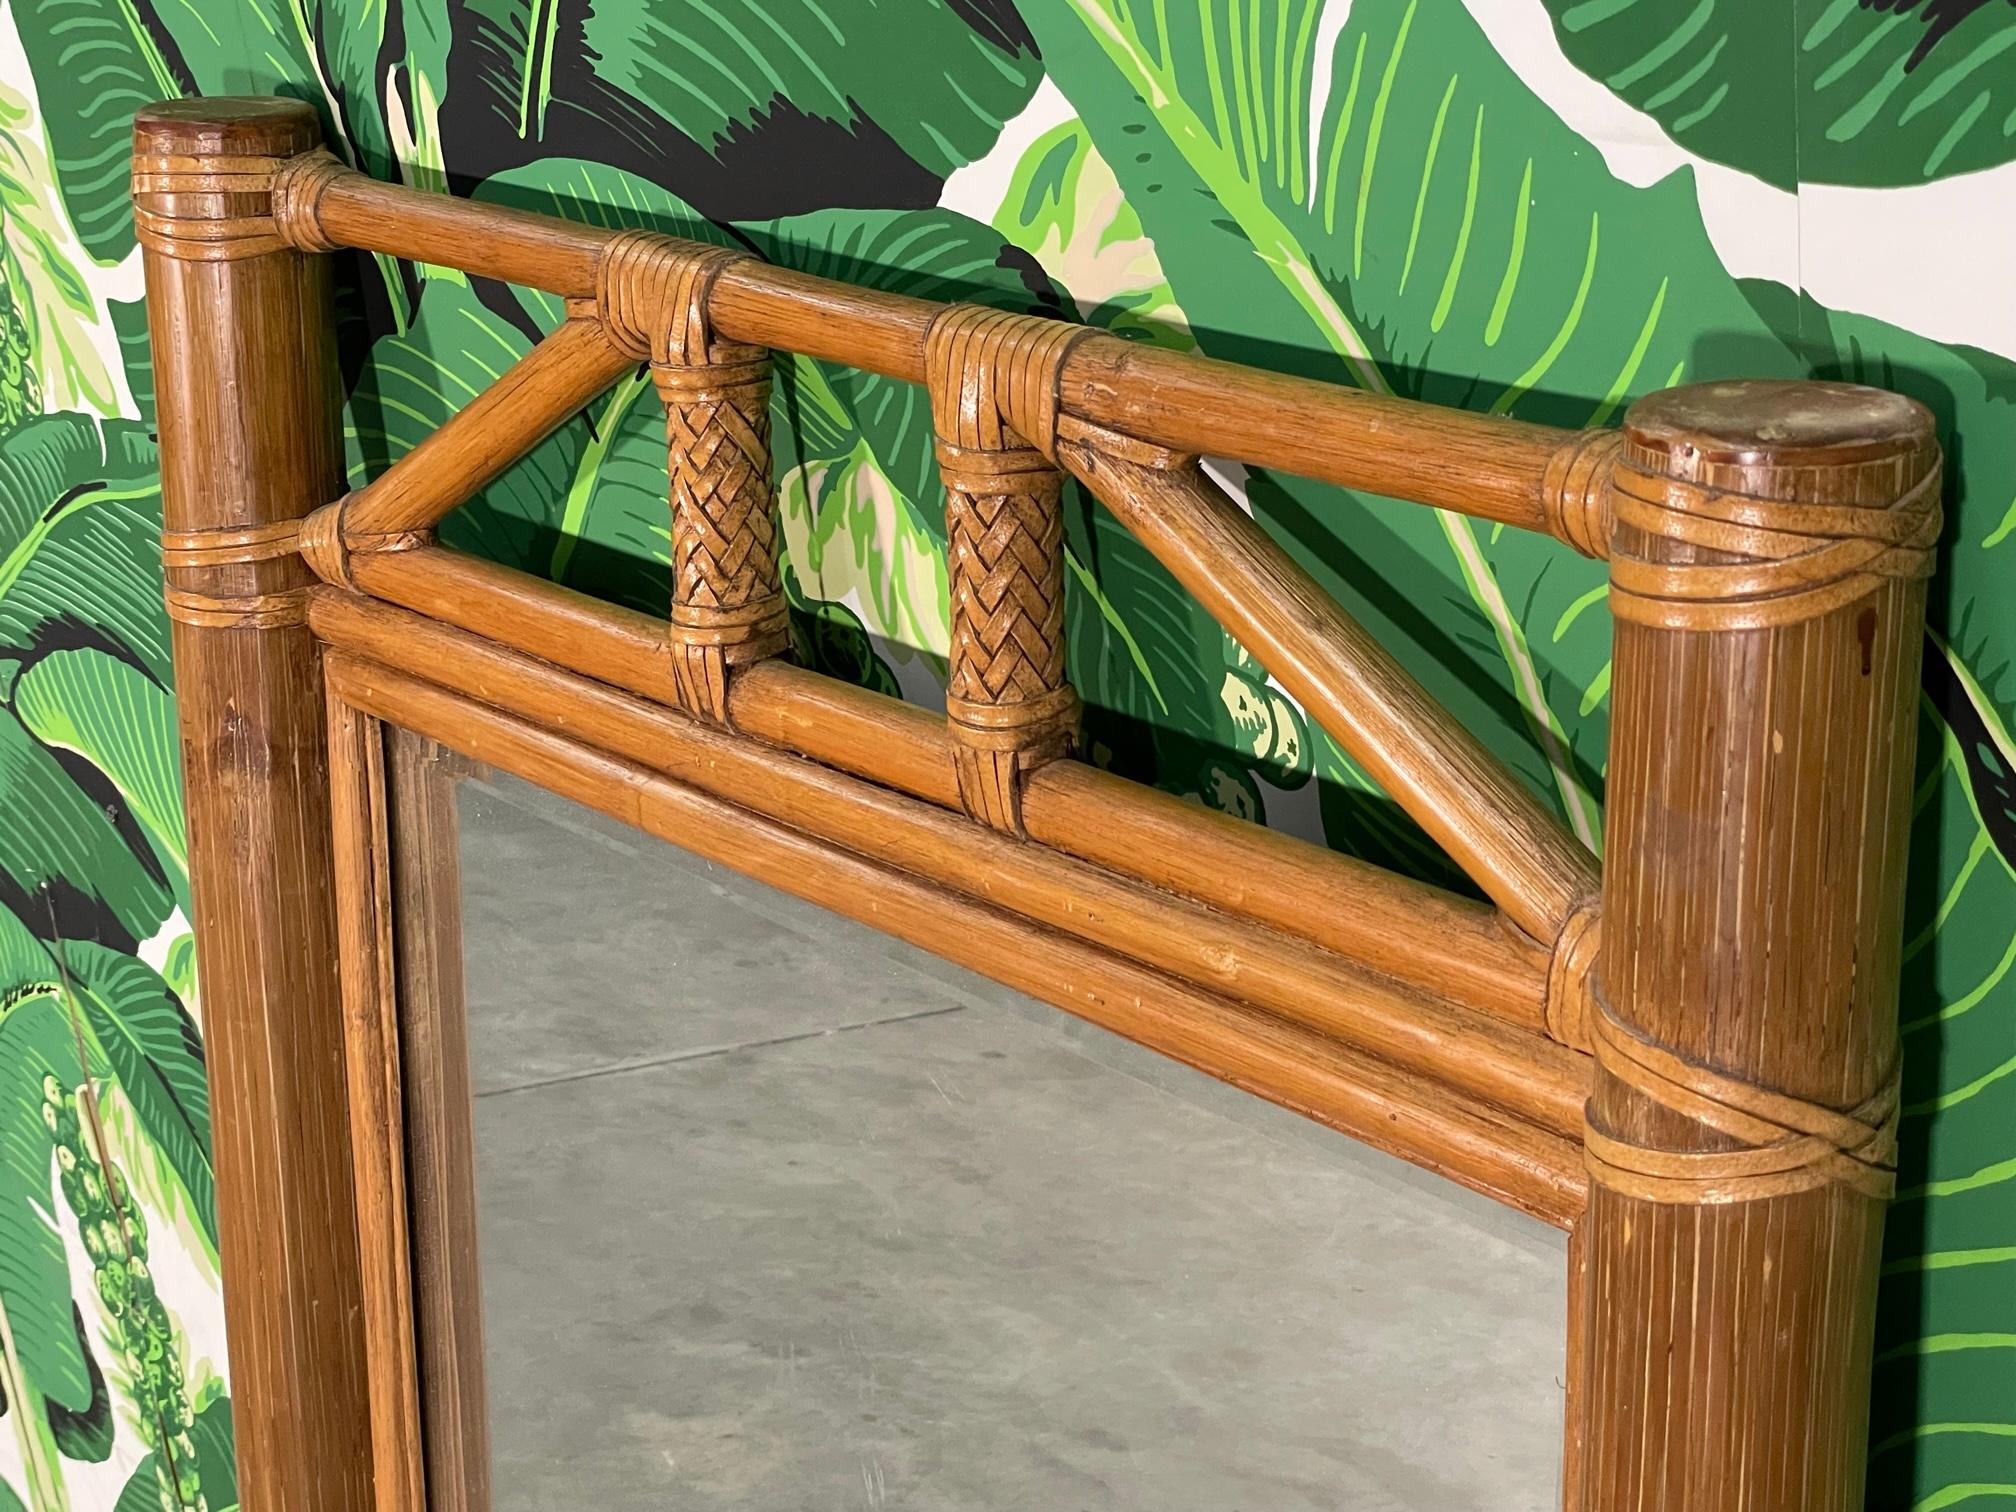 Tropical style wall mirror features bamboo and rattan frame with leather wrapped bindings. Good condition with imperfections consistent with age. May exhibit scuffs, marks, or wear, see photos for details.

 